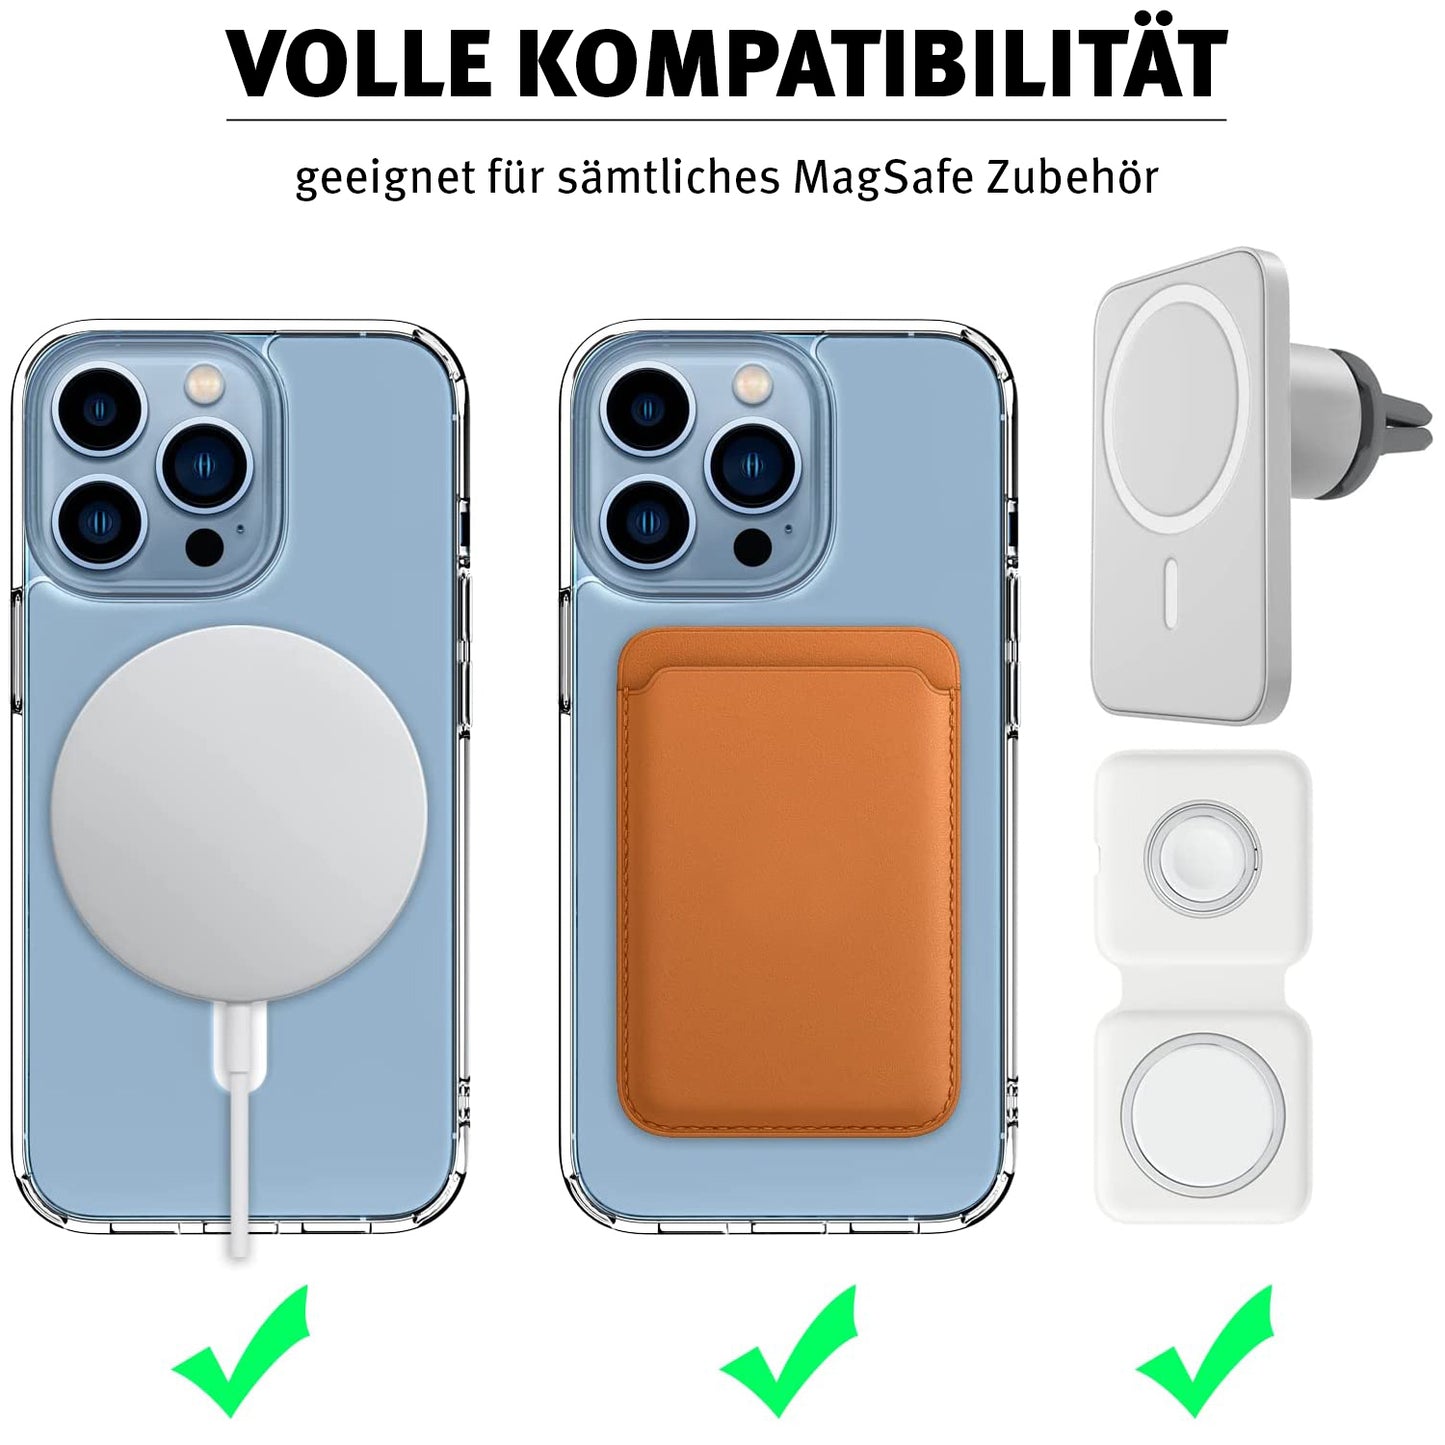 iCEO iPhone 13 Pro Crystal Case mit MagSafe - Transparent